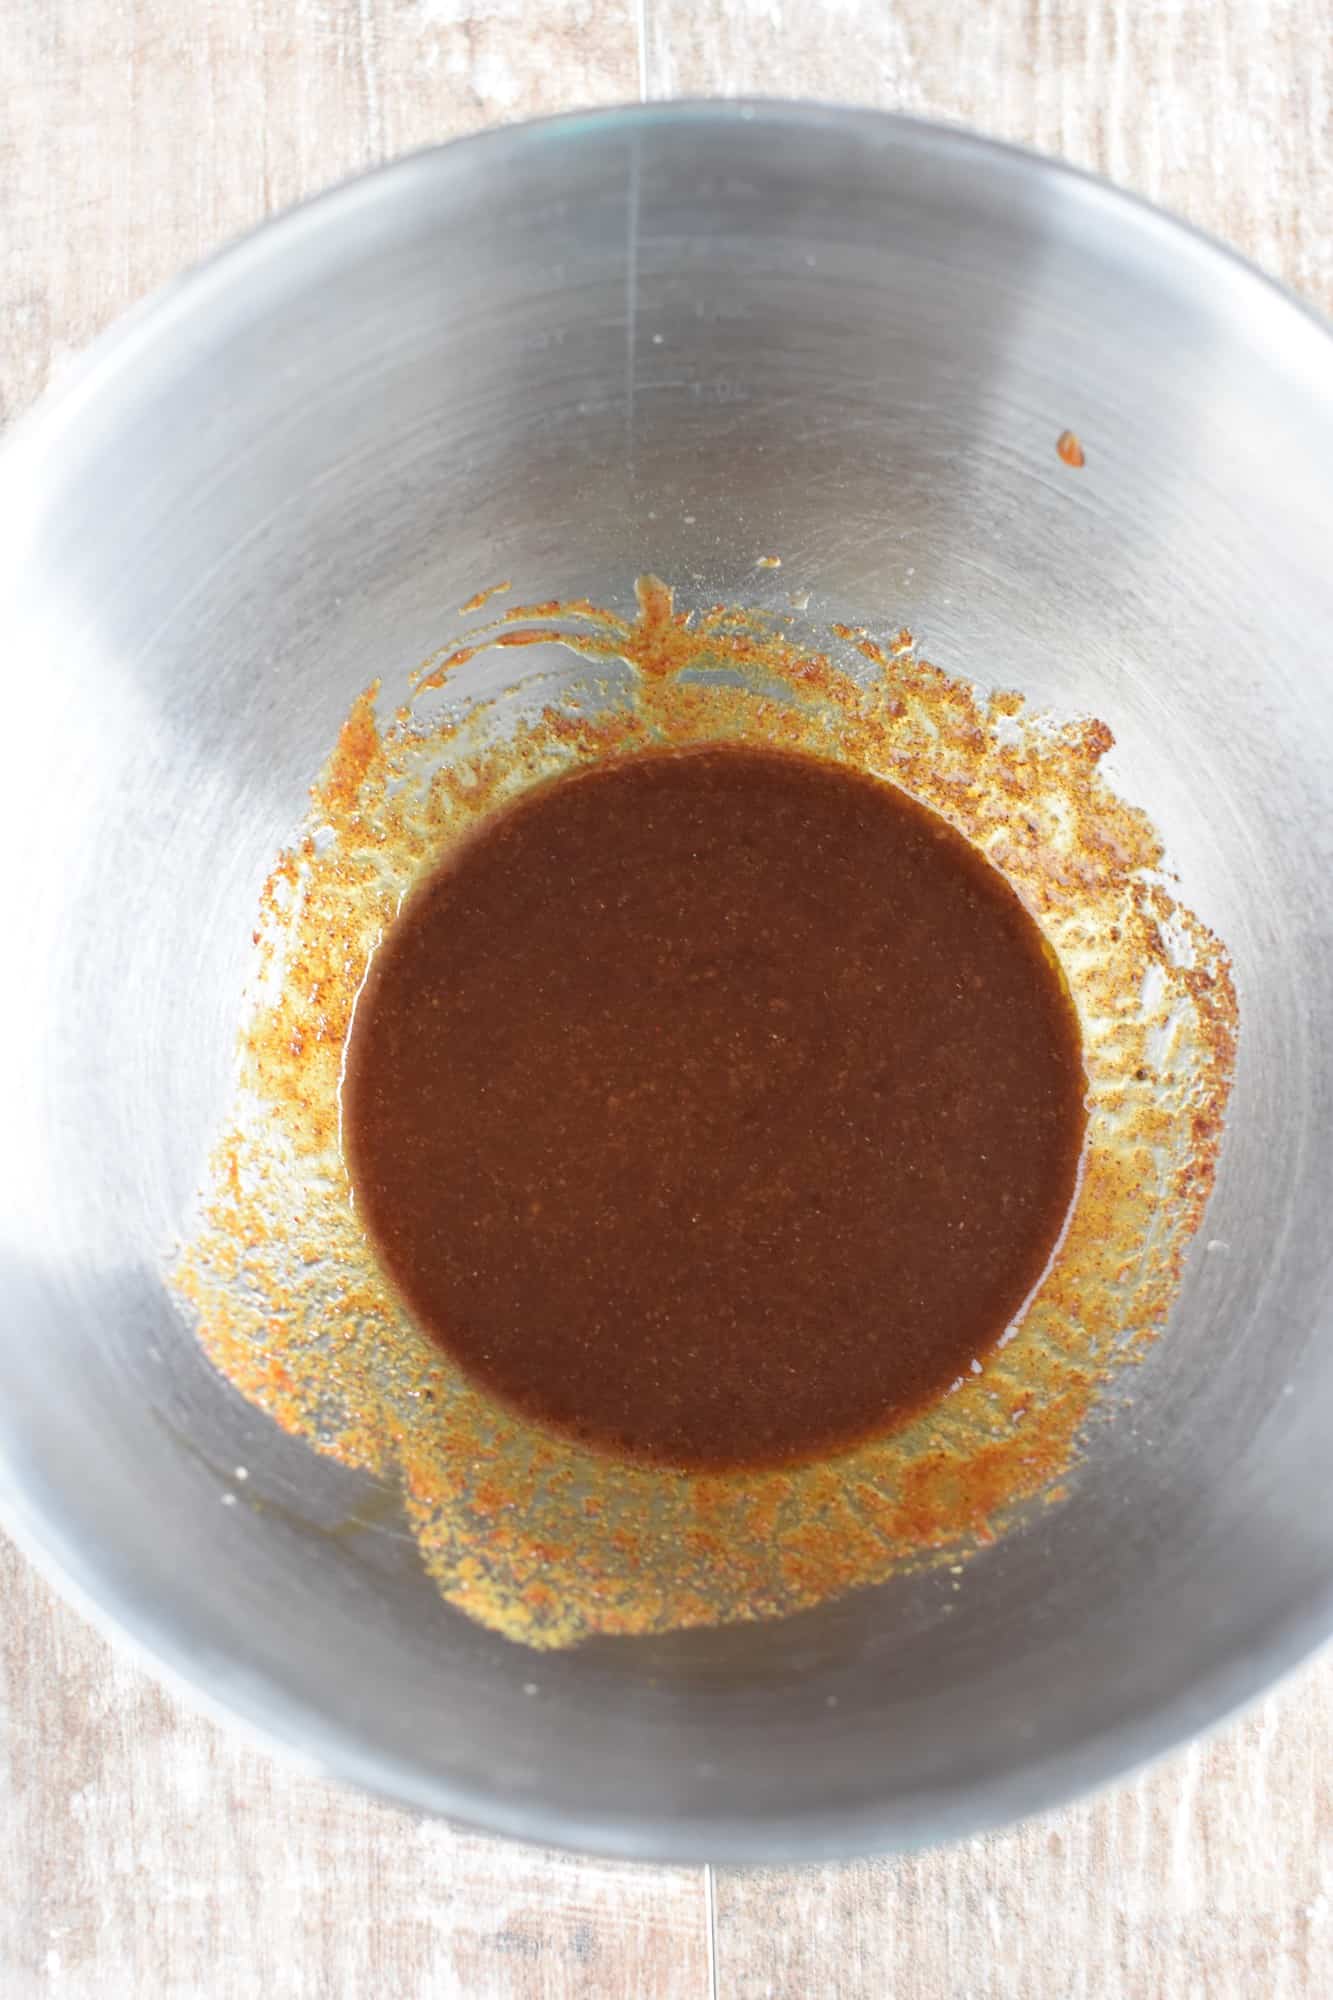 marinade ingredients mixed together in mixing bowl